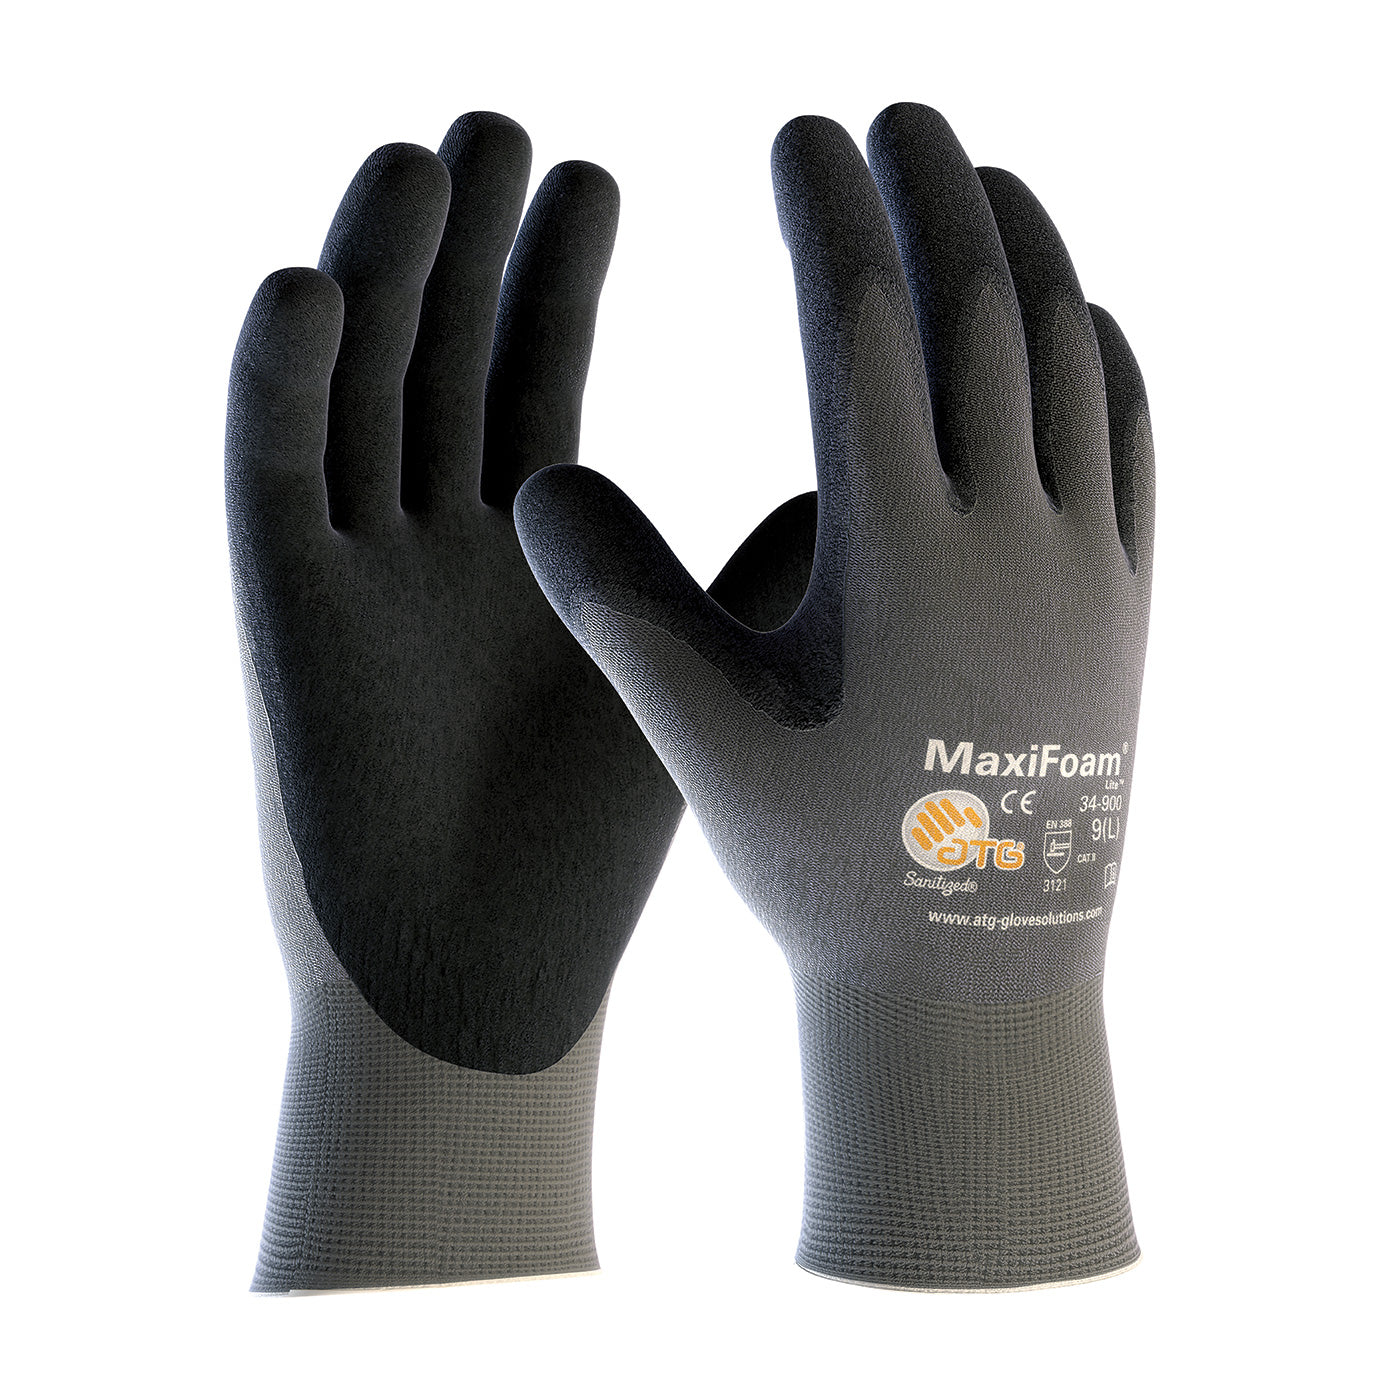 Premium Quality Nylon Rubber Coated Safety Hand Gloves For Industrial Work  (5 Pair)